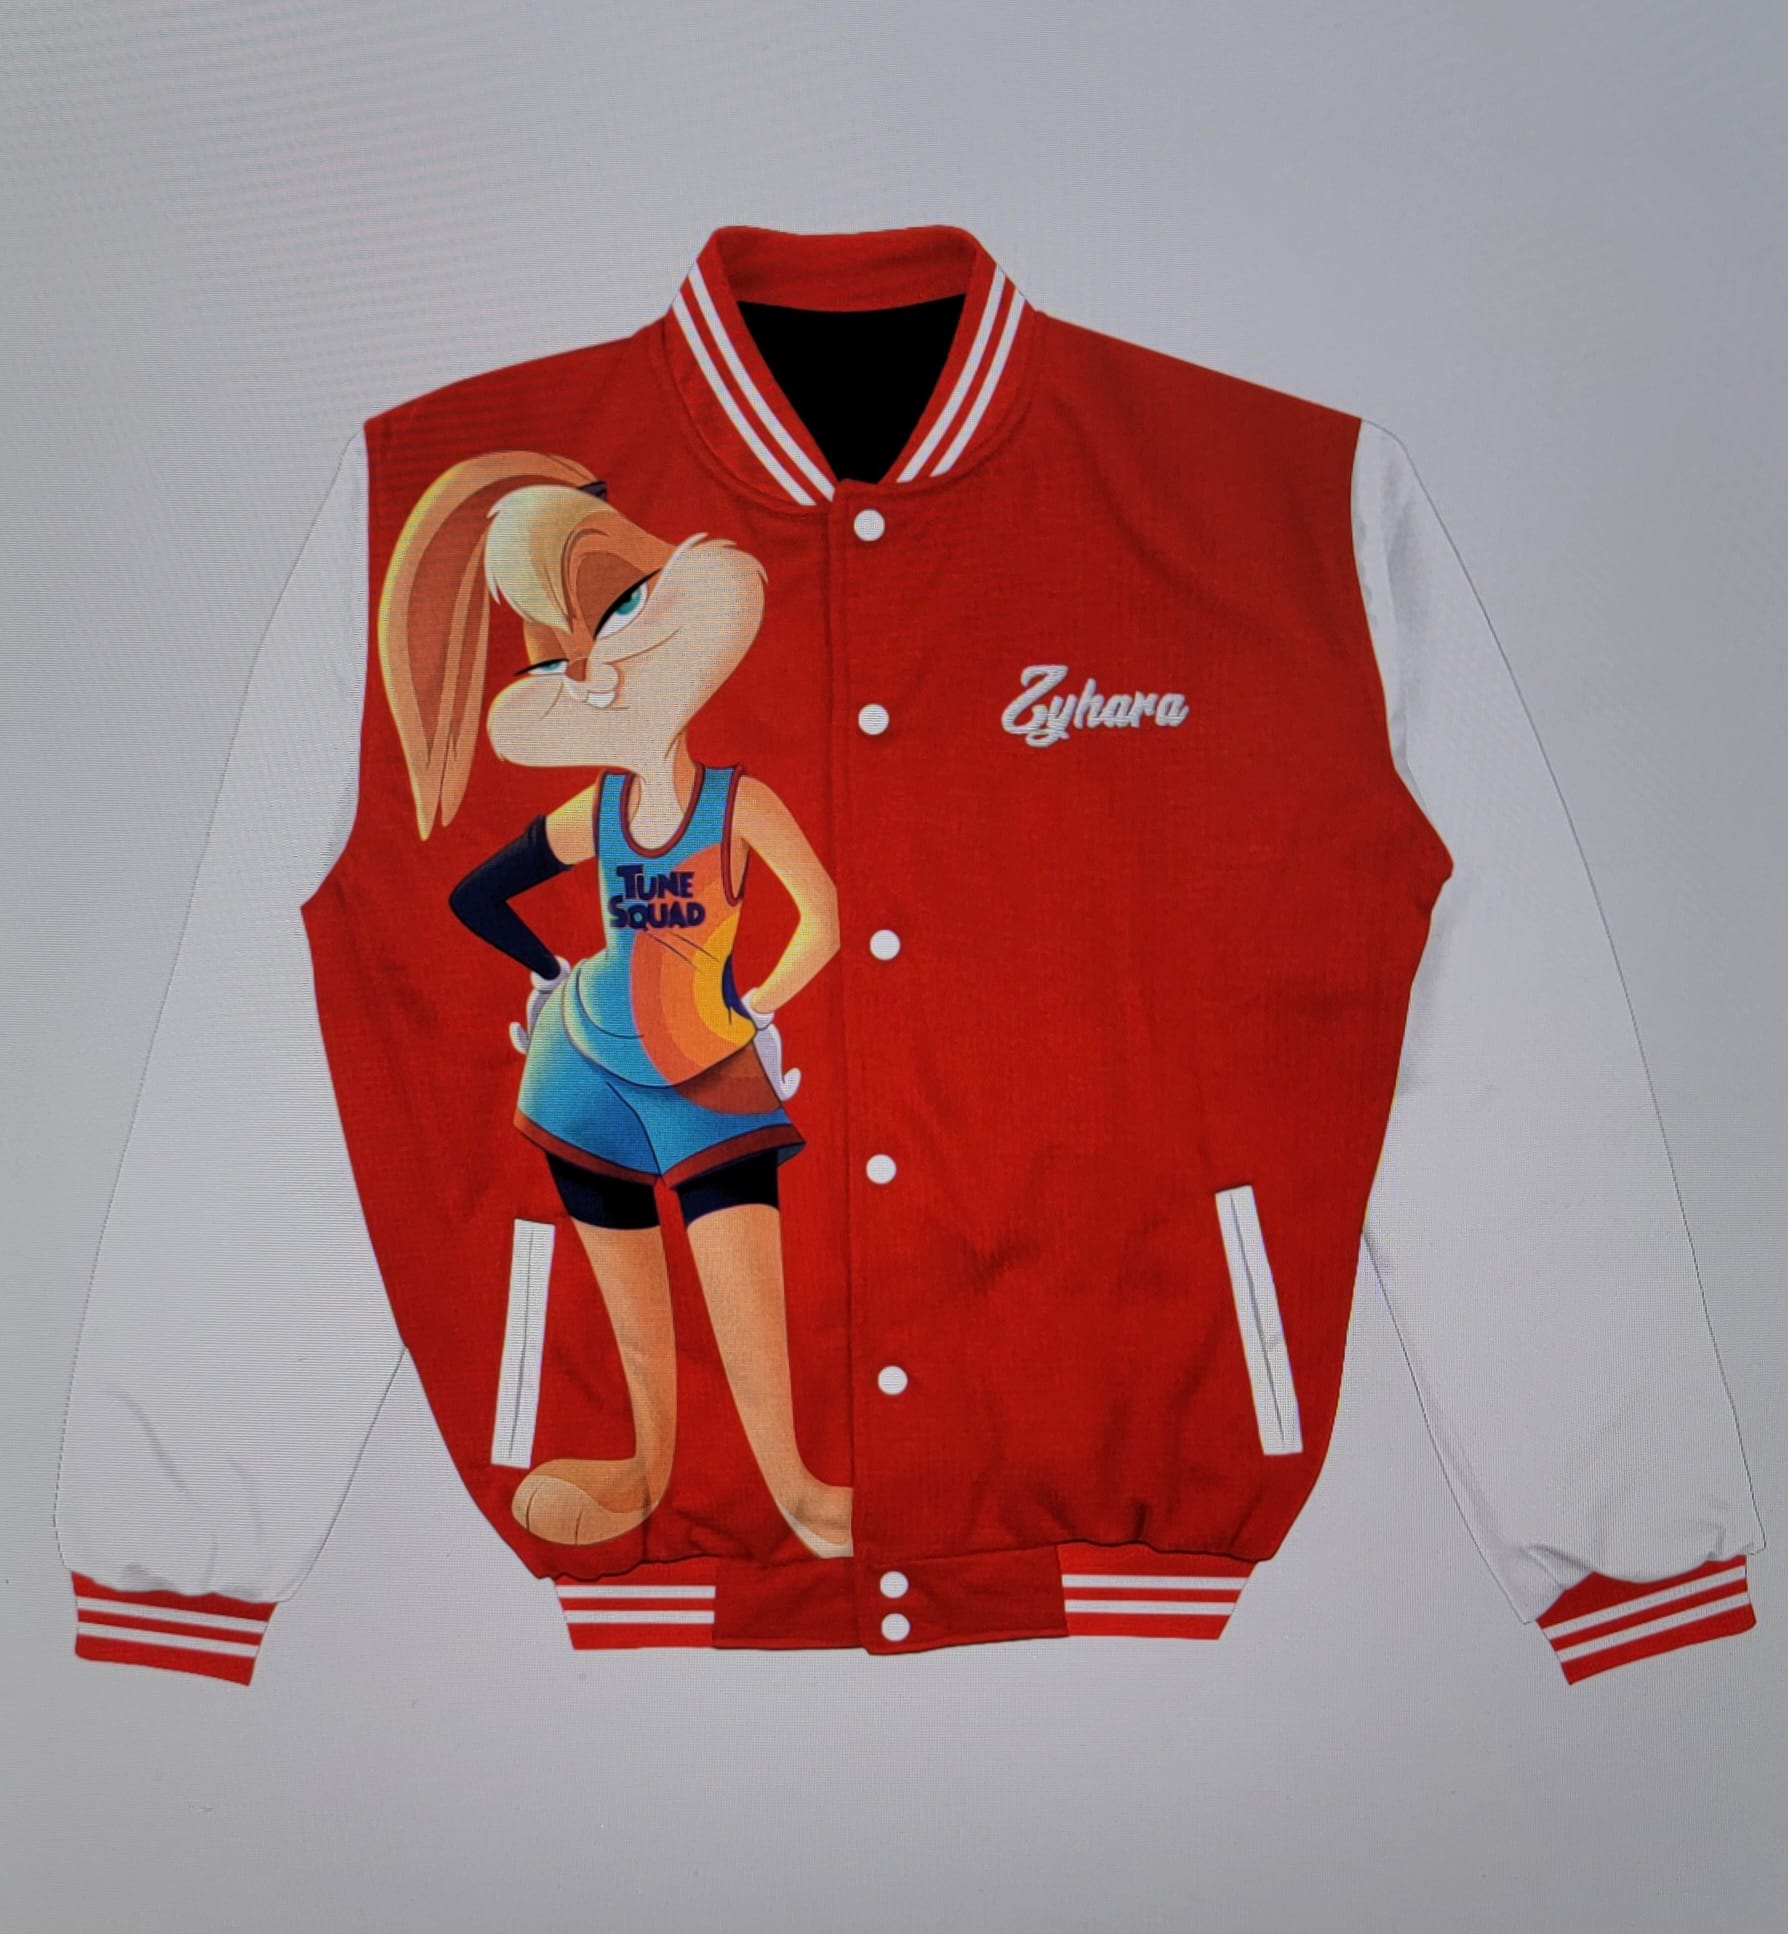 Personalized Varsity Jackets as Discussed